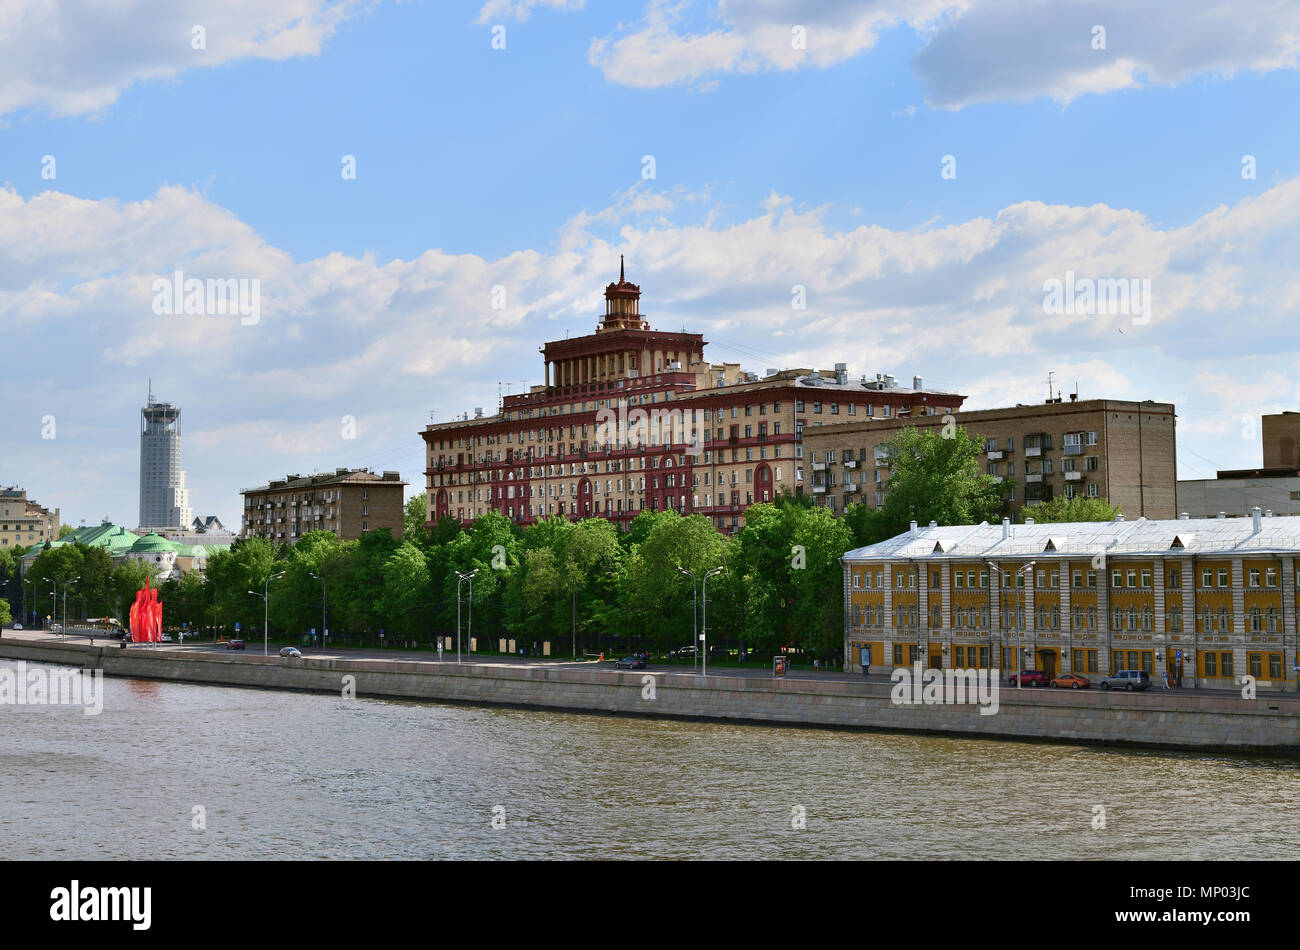 Moscow, Russia - view of Cosmidamian embankment of Moskva River Stock Photo